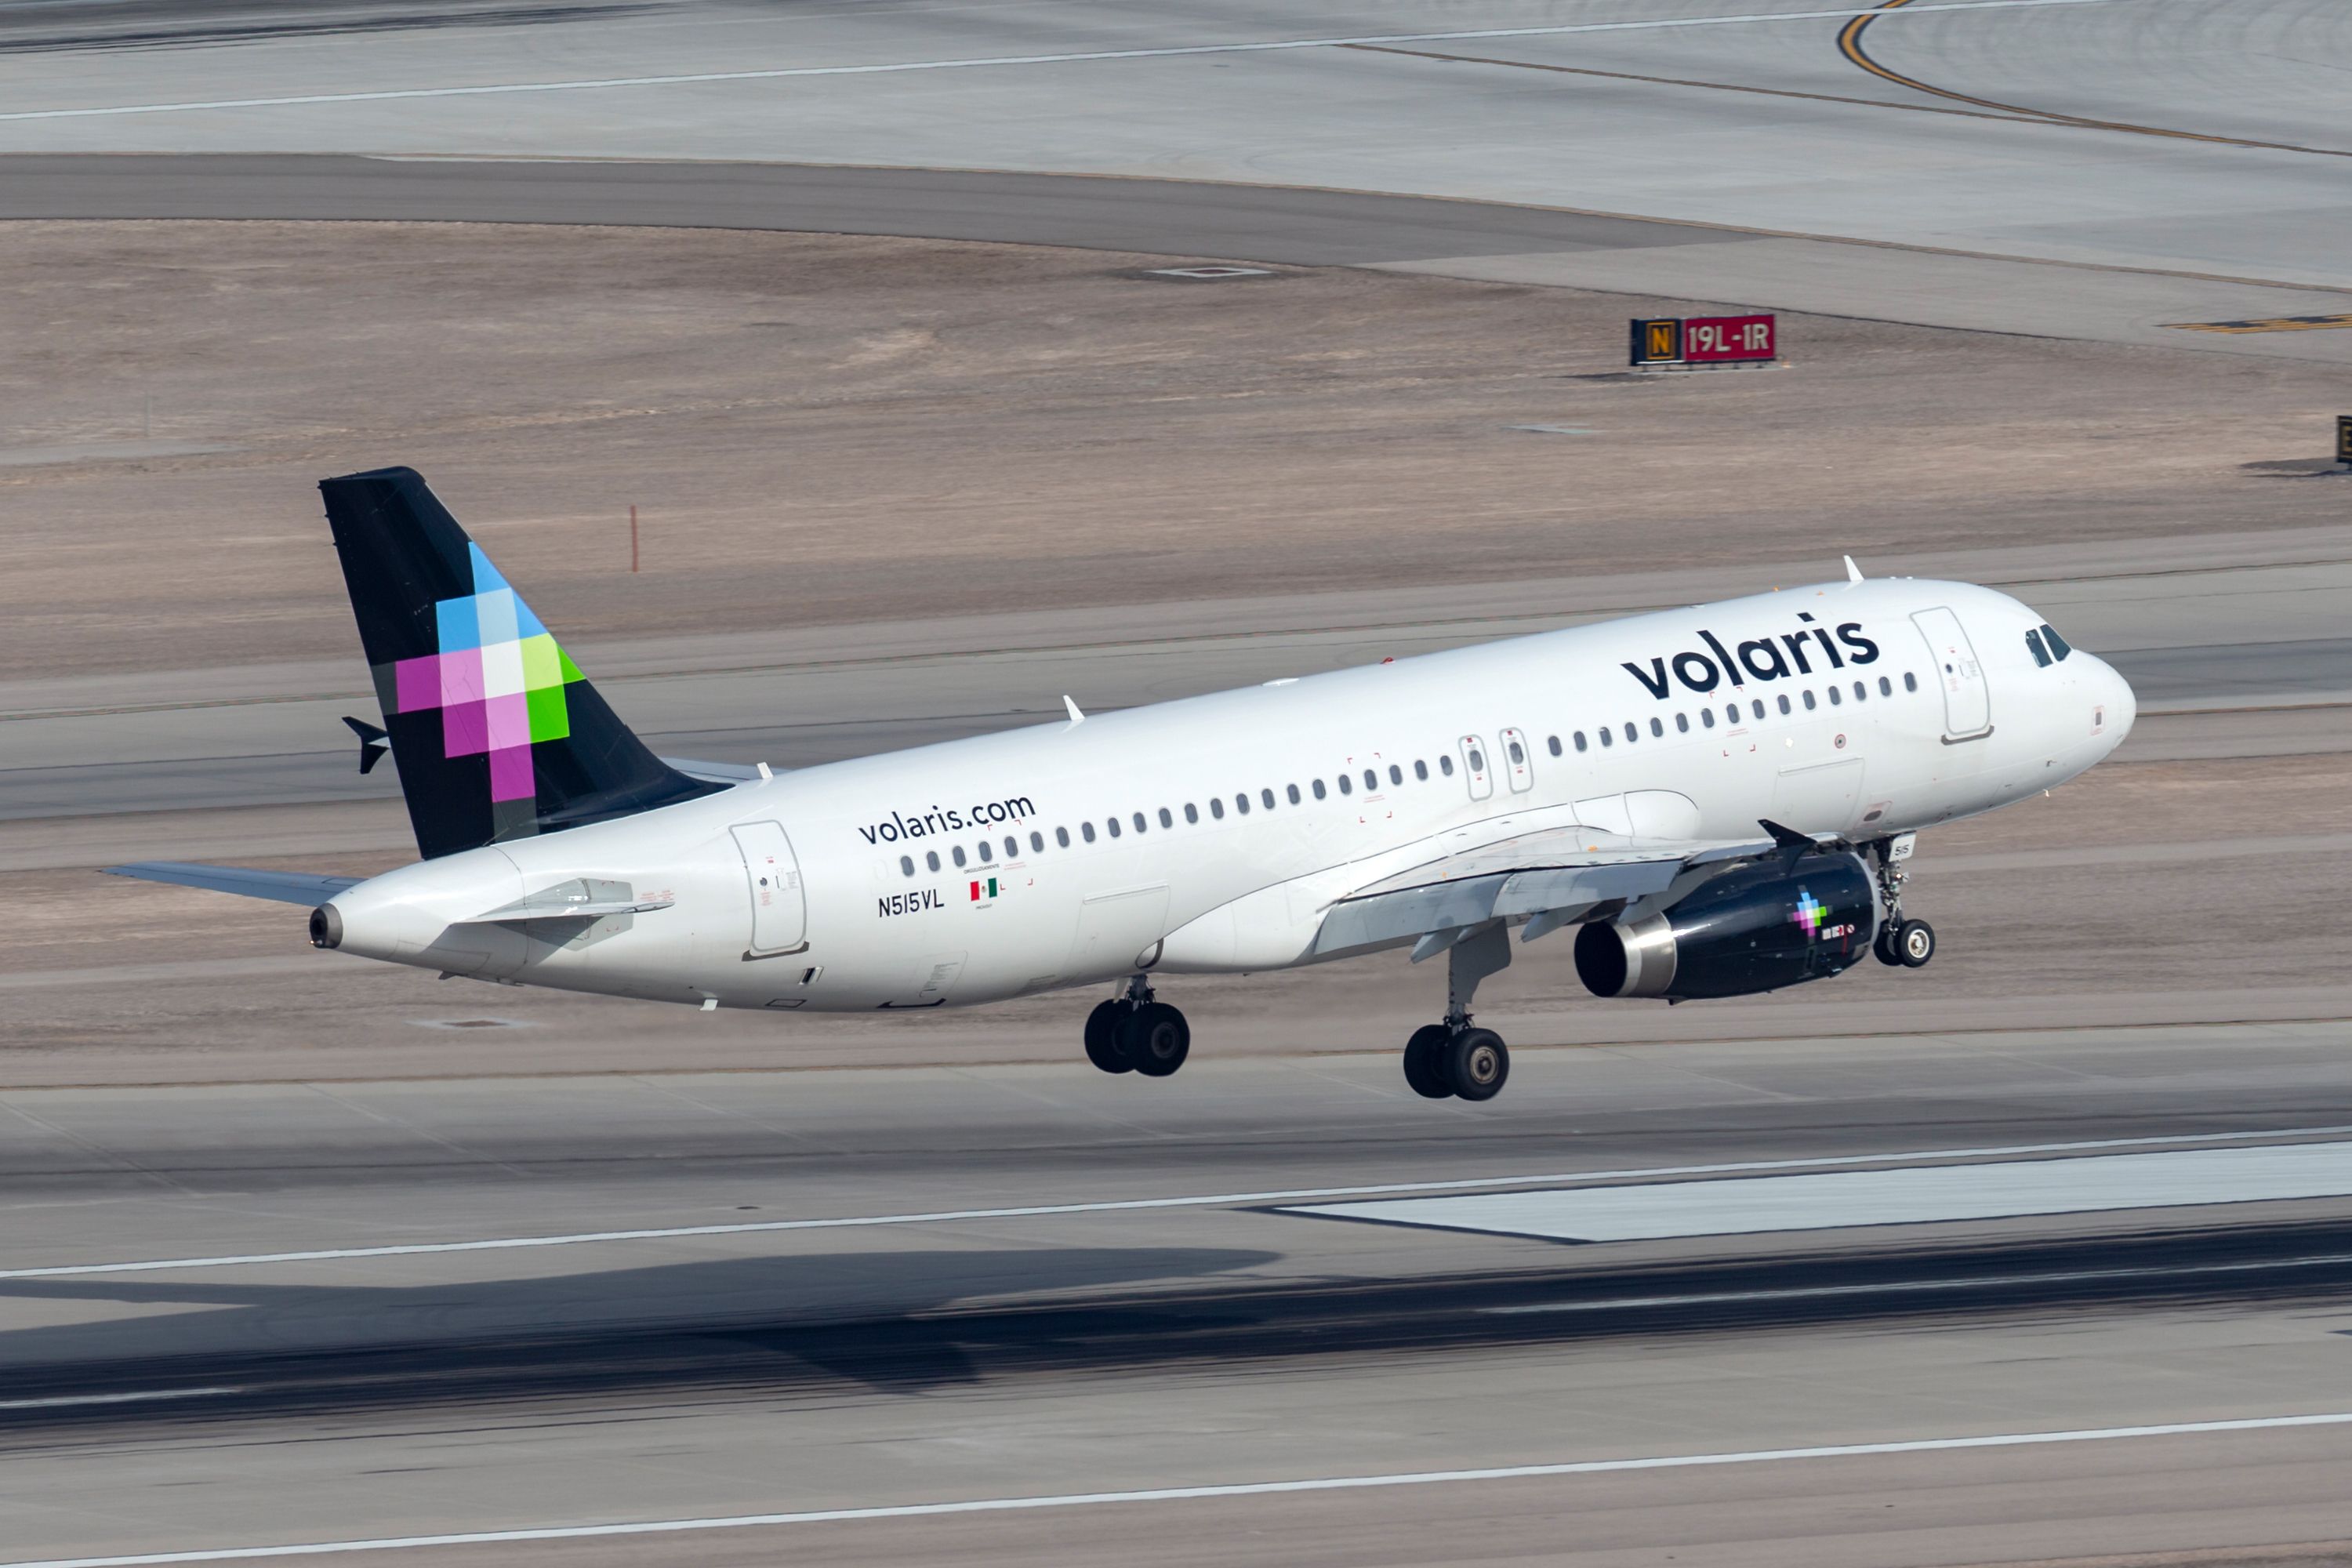 A Volaris Airbus A320 taking off